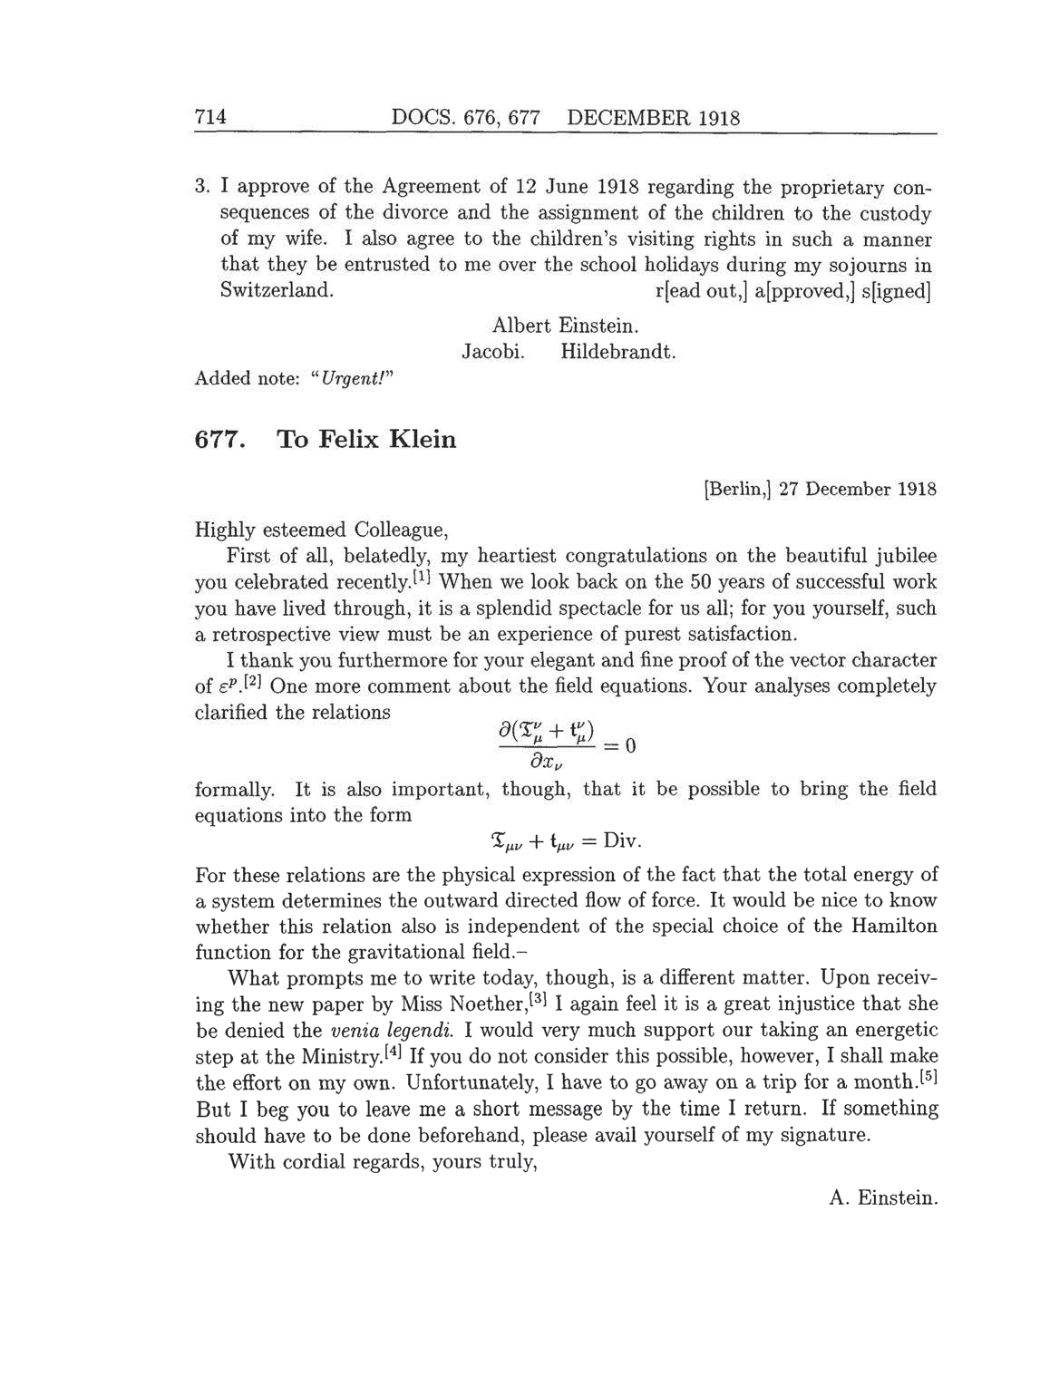 Volume 8: The Berlin Years: Correspondence, 1914-1918 (English translation supplement) page 6